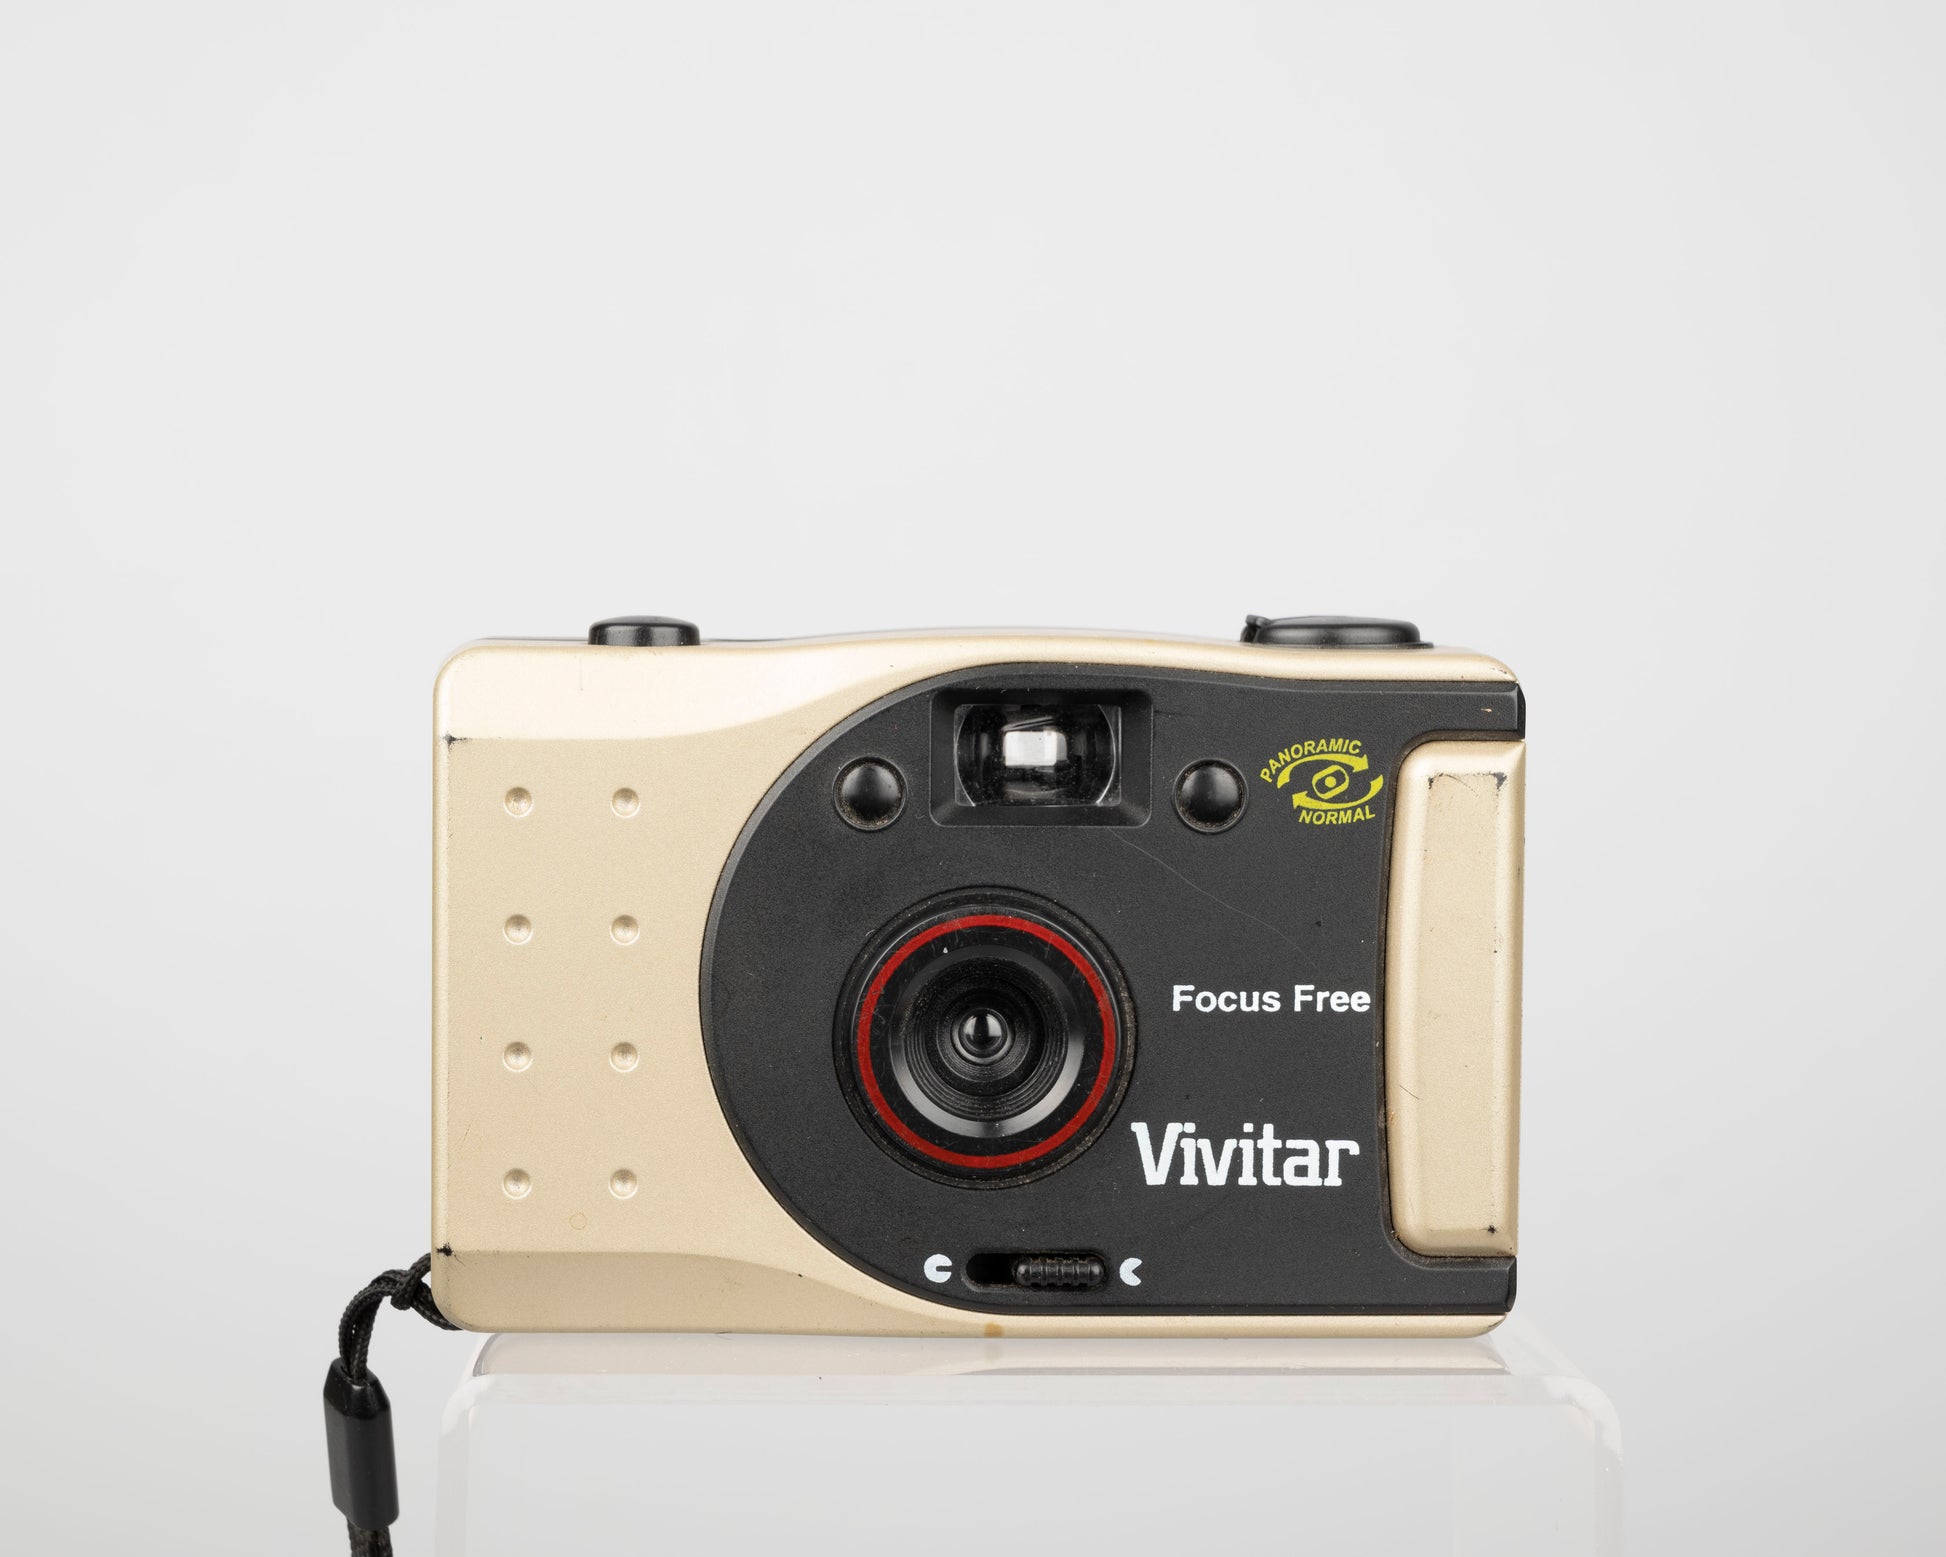 The Vivitar PN2011 is a simple, mechanical 35mm camera.